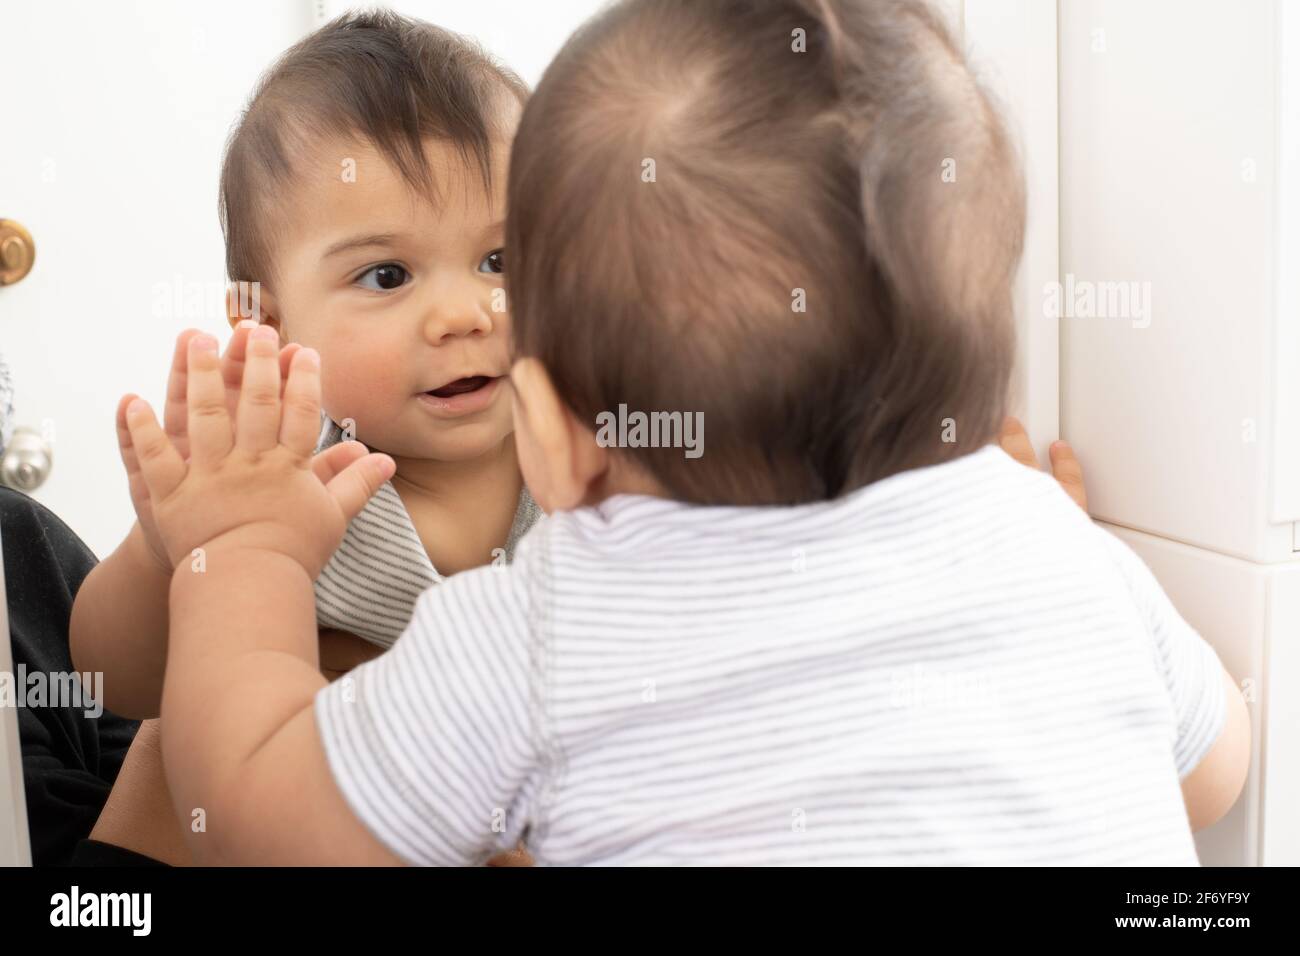 8 month old baby boy closeup looking at his reflection in mirror, does not know it is his own reflection Stock Photo